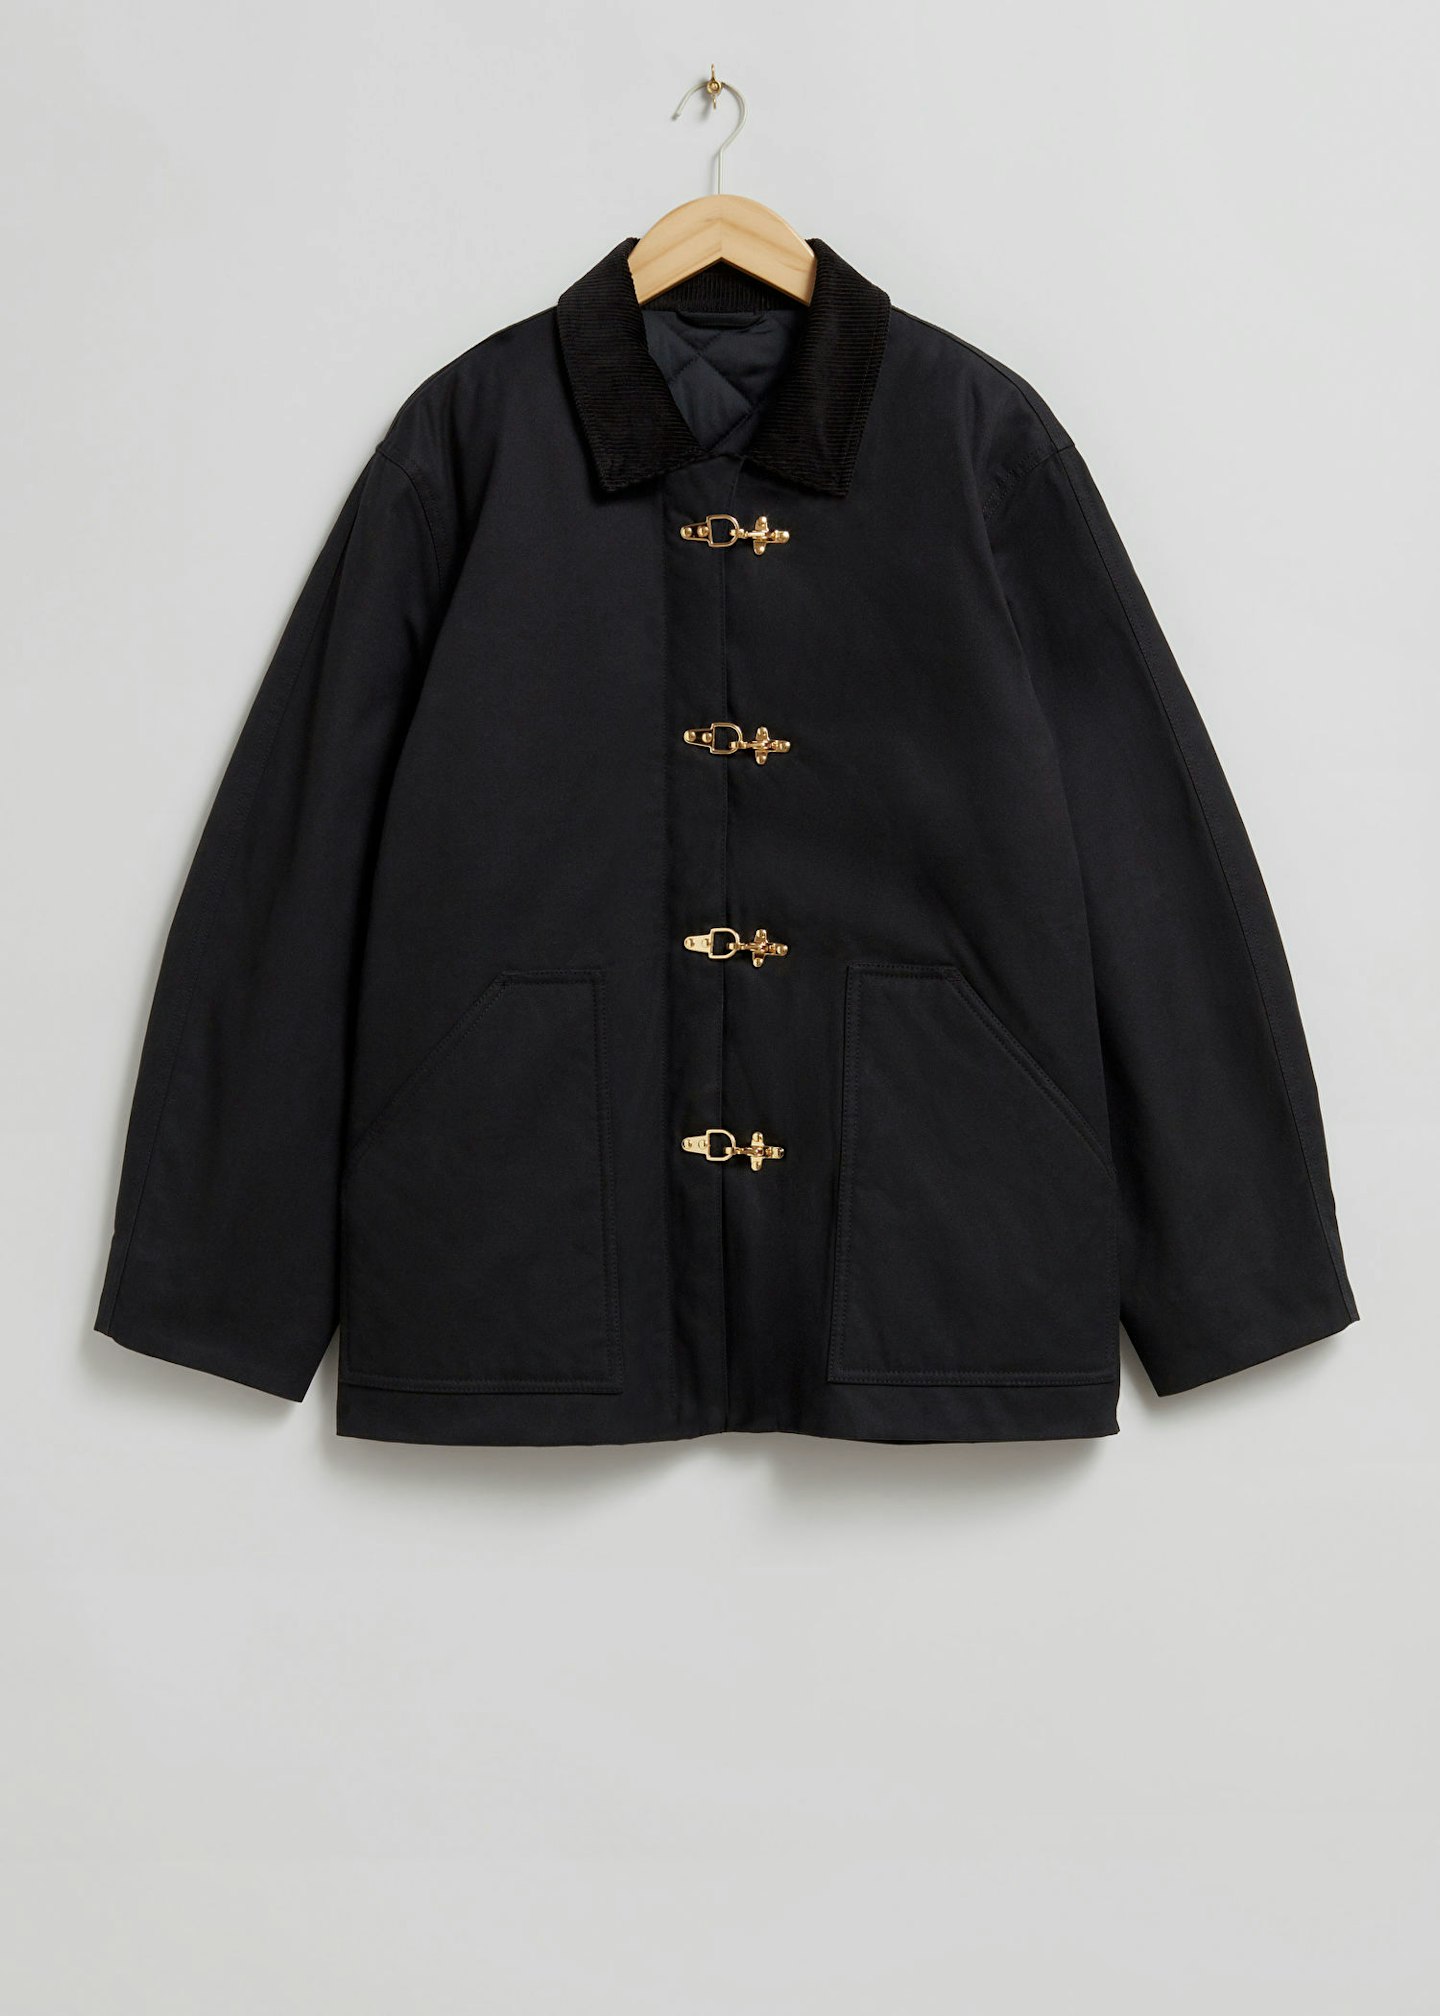 & Other Stories, Loose-Fit Duffle Jacket